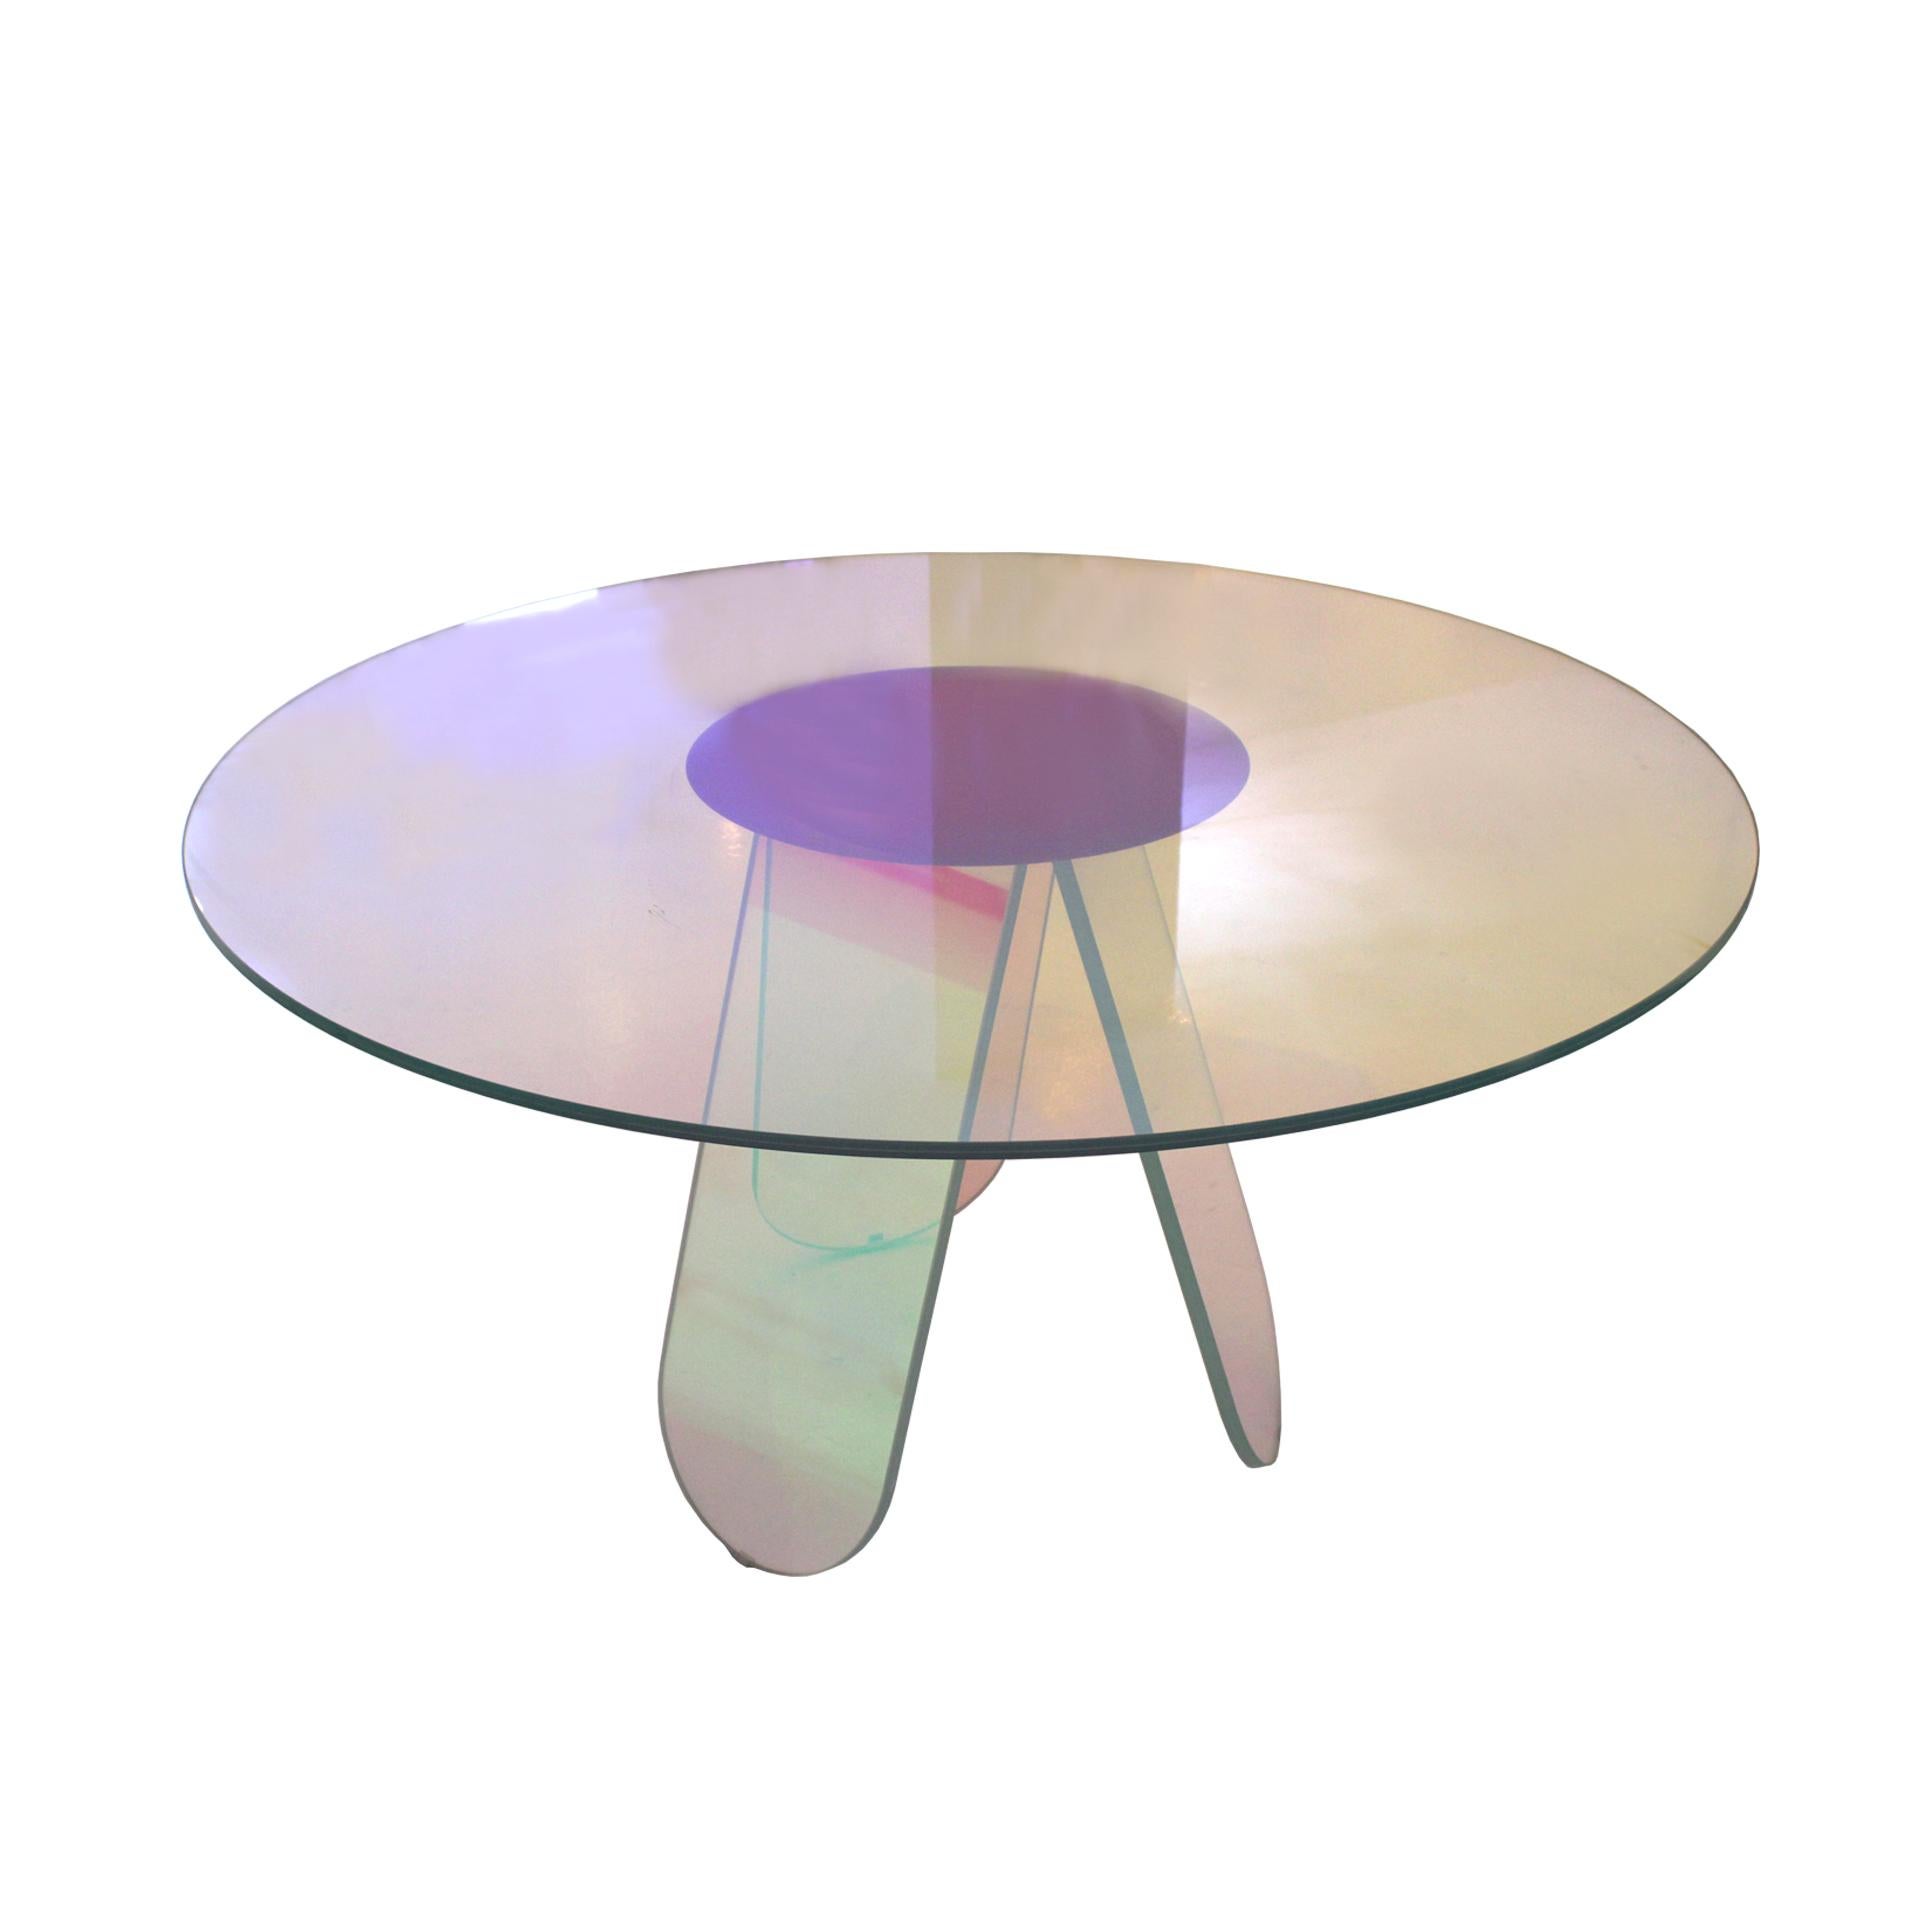 «Shimmer» table designed by Patricia Urquiola edited by Glas Italia. Made of laminated and glued glass with a multichromatic finish, whose coloration varies according to the angle of incidence of light and the point of observation.

Slightly